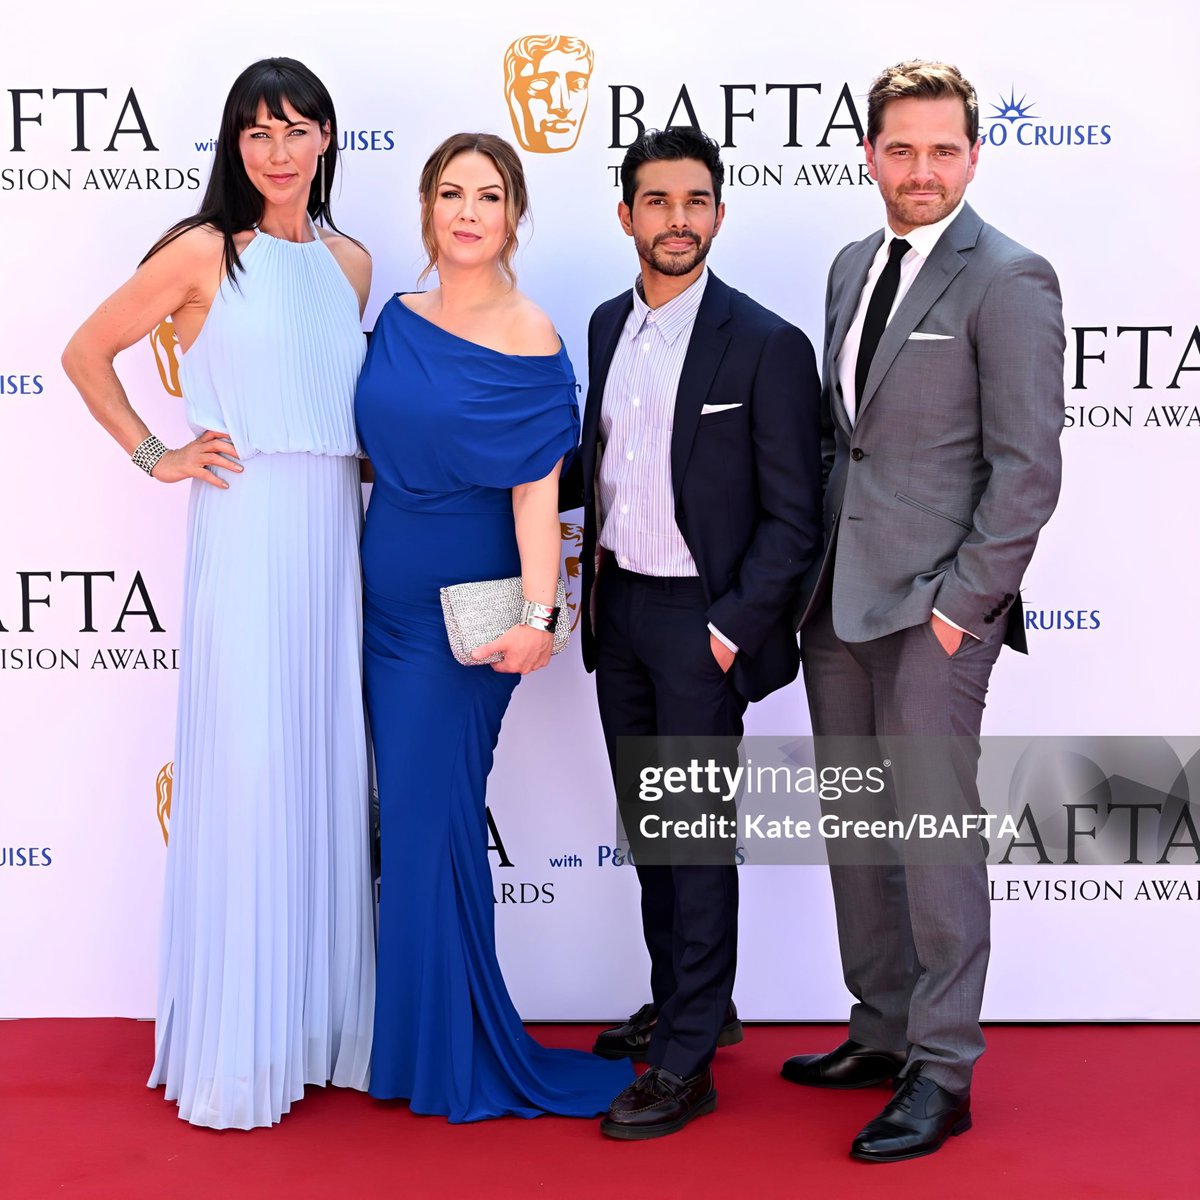 Stepping onto the red carpet with my incredible @BBCCasualty family at the BAFTAs tonight! 💫 So proud to be part of such a talented and dedicated team. #BAFTA #Casualty #BAFTATVAwards